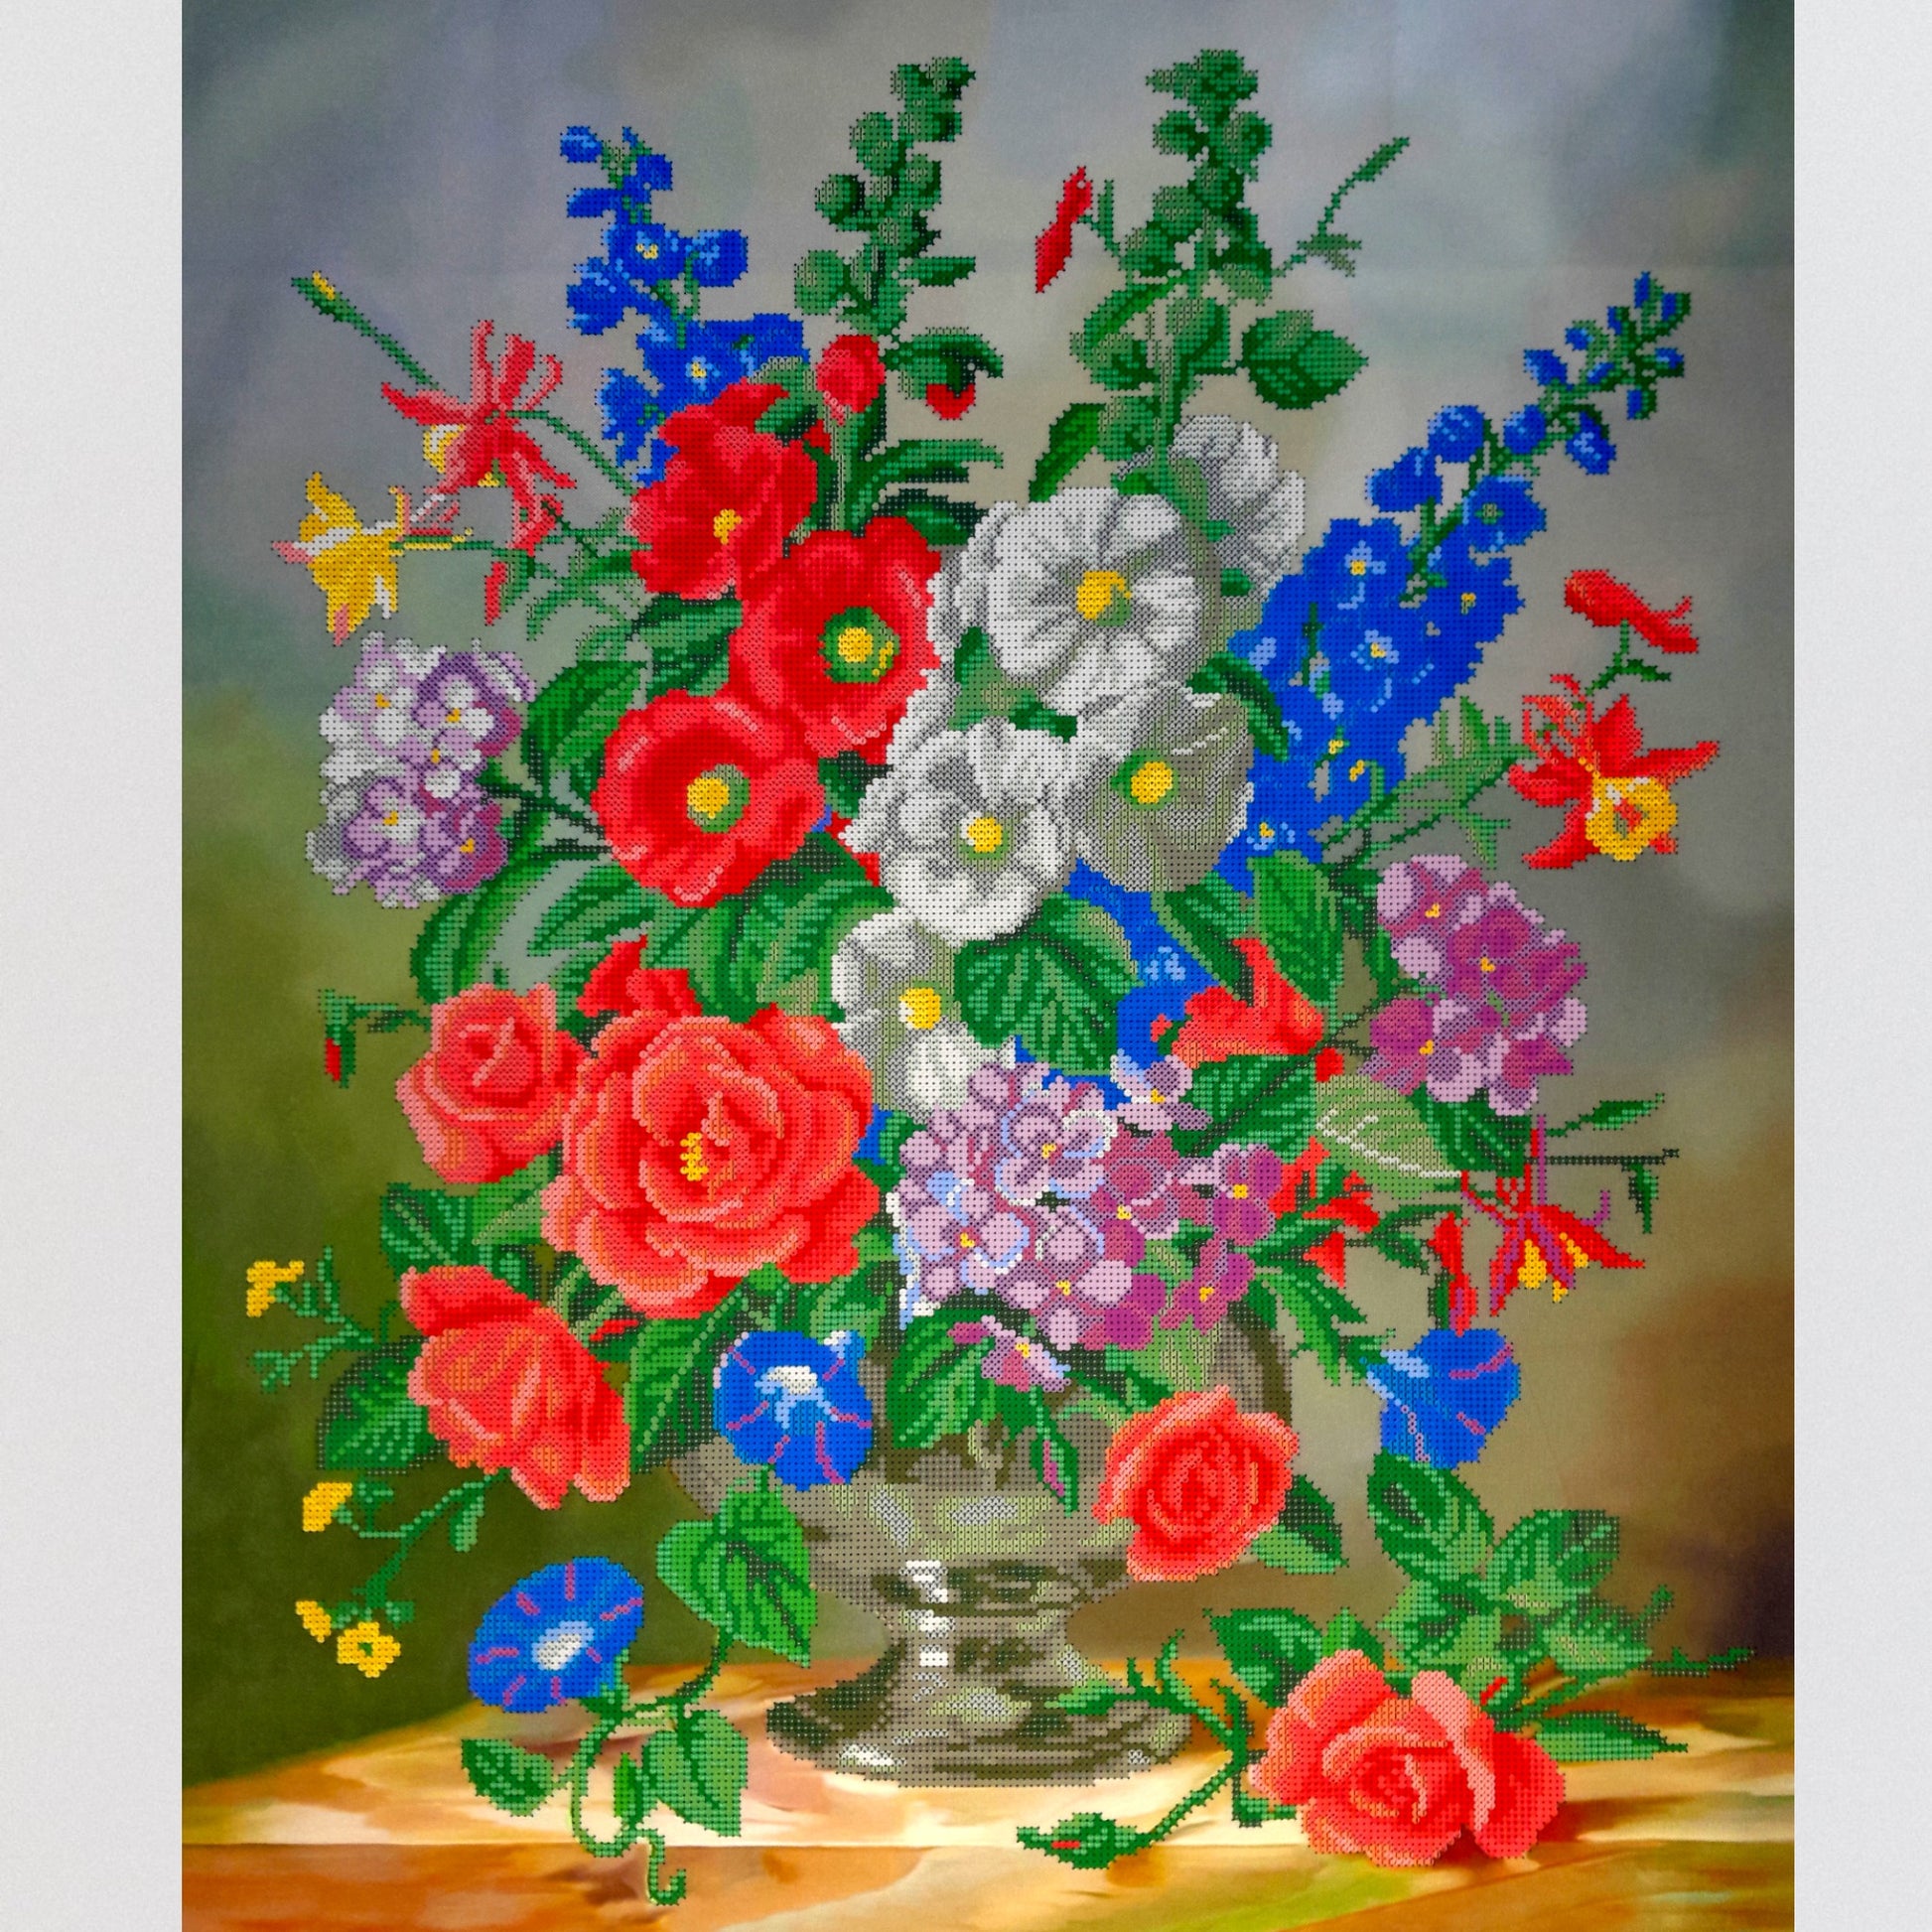 DIY Bead embroidery kit "Bouquet Flowers''. Size: 19.7-23.6 in (50-60cm) - VadymShop